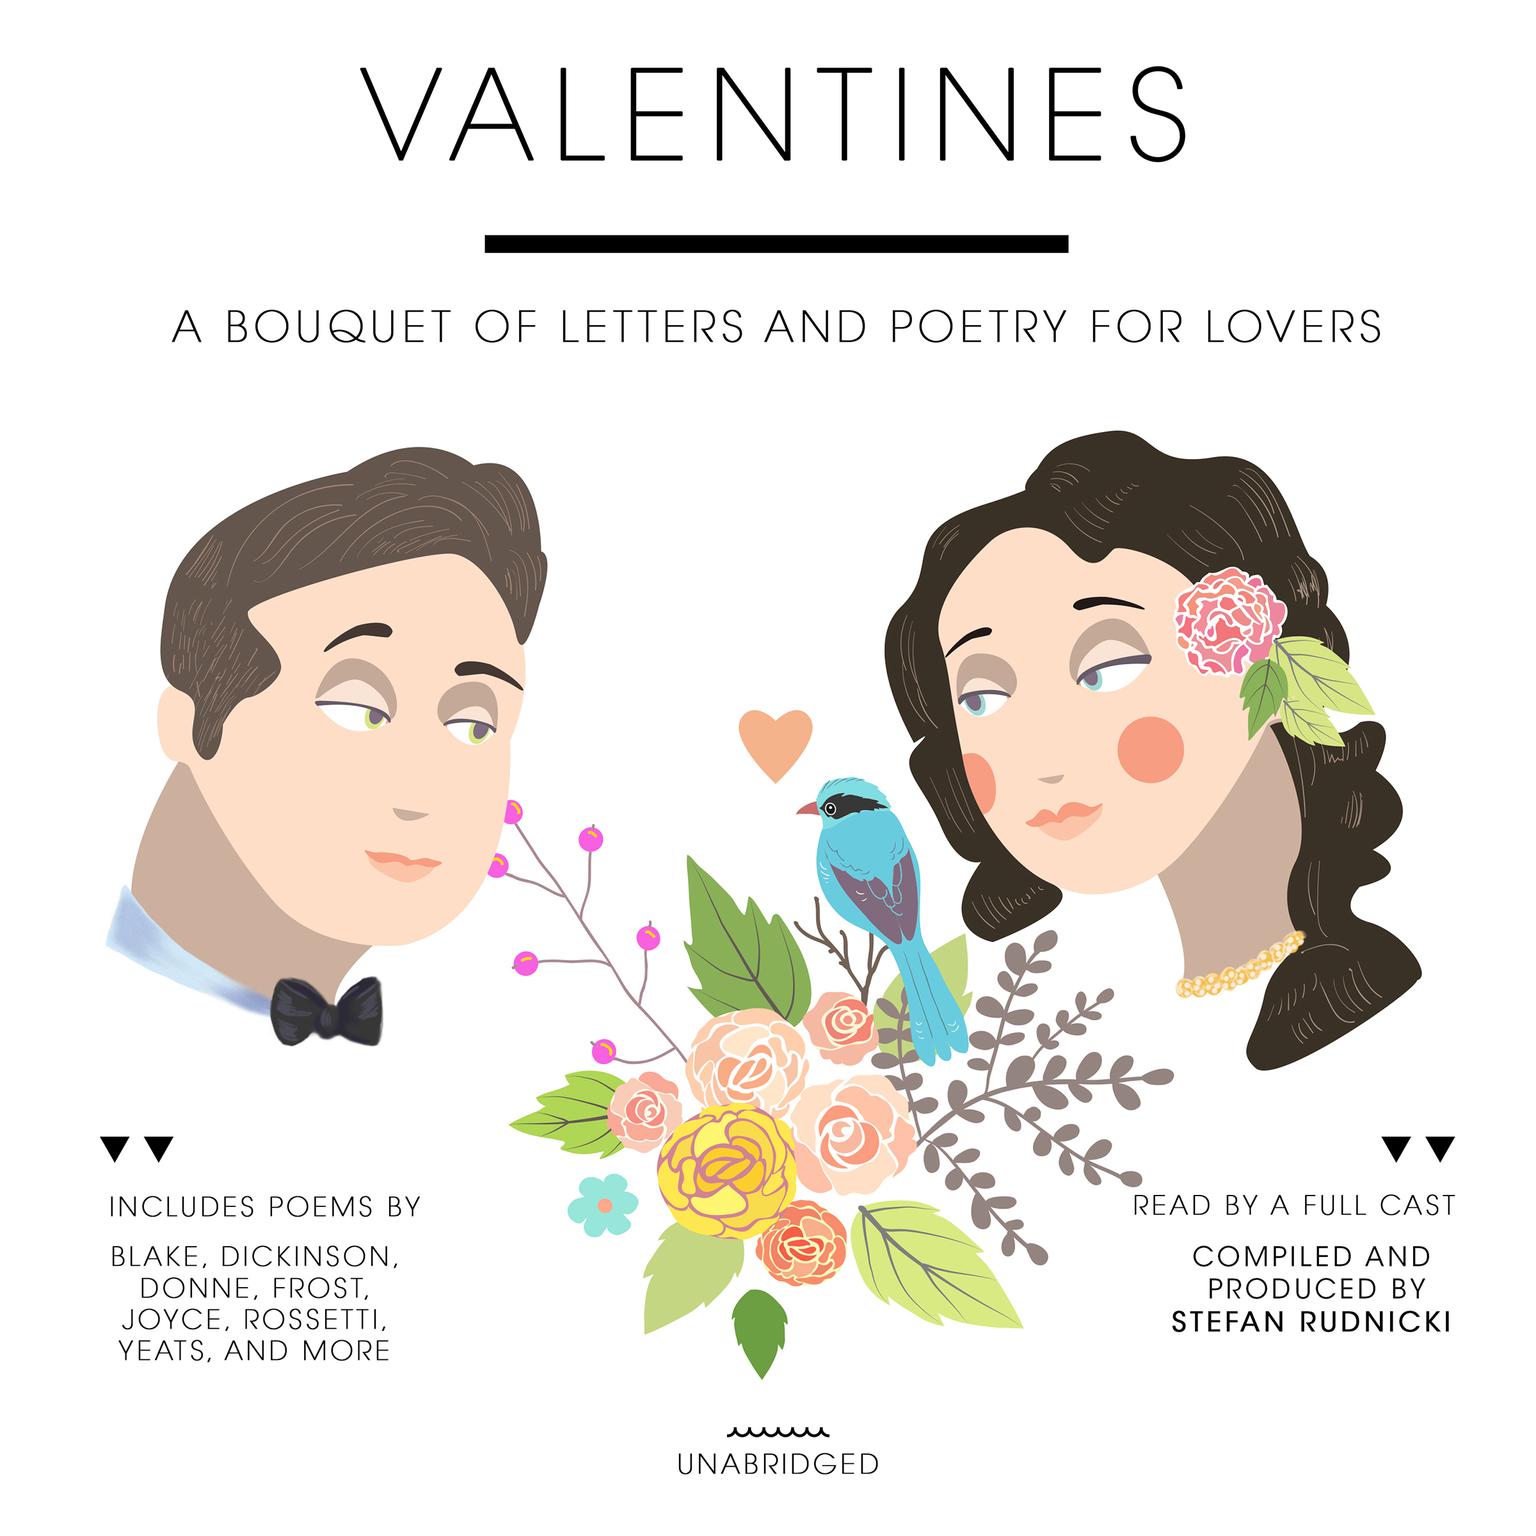 Valentines: A Bouquet of Letters and Poetry for Lovers Audiobook, by Stefan Rudnicki